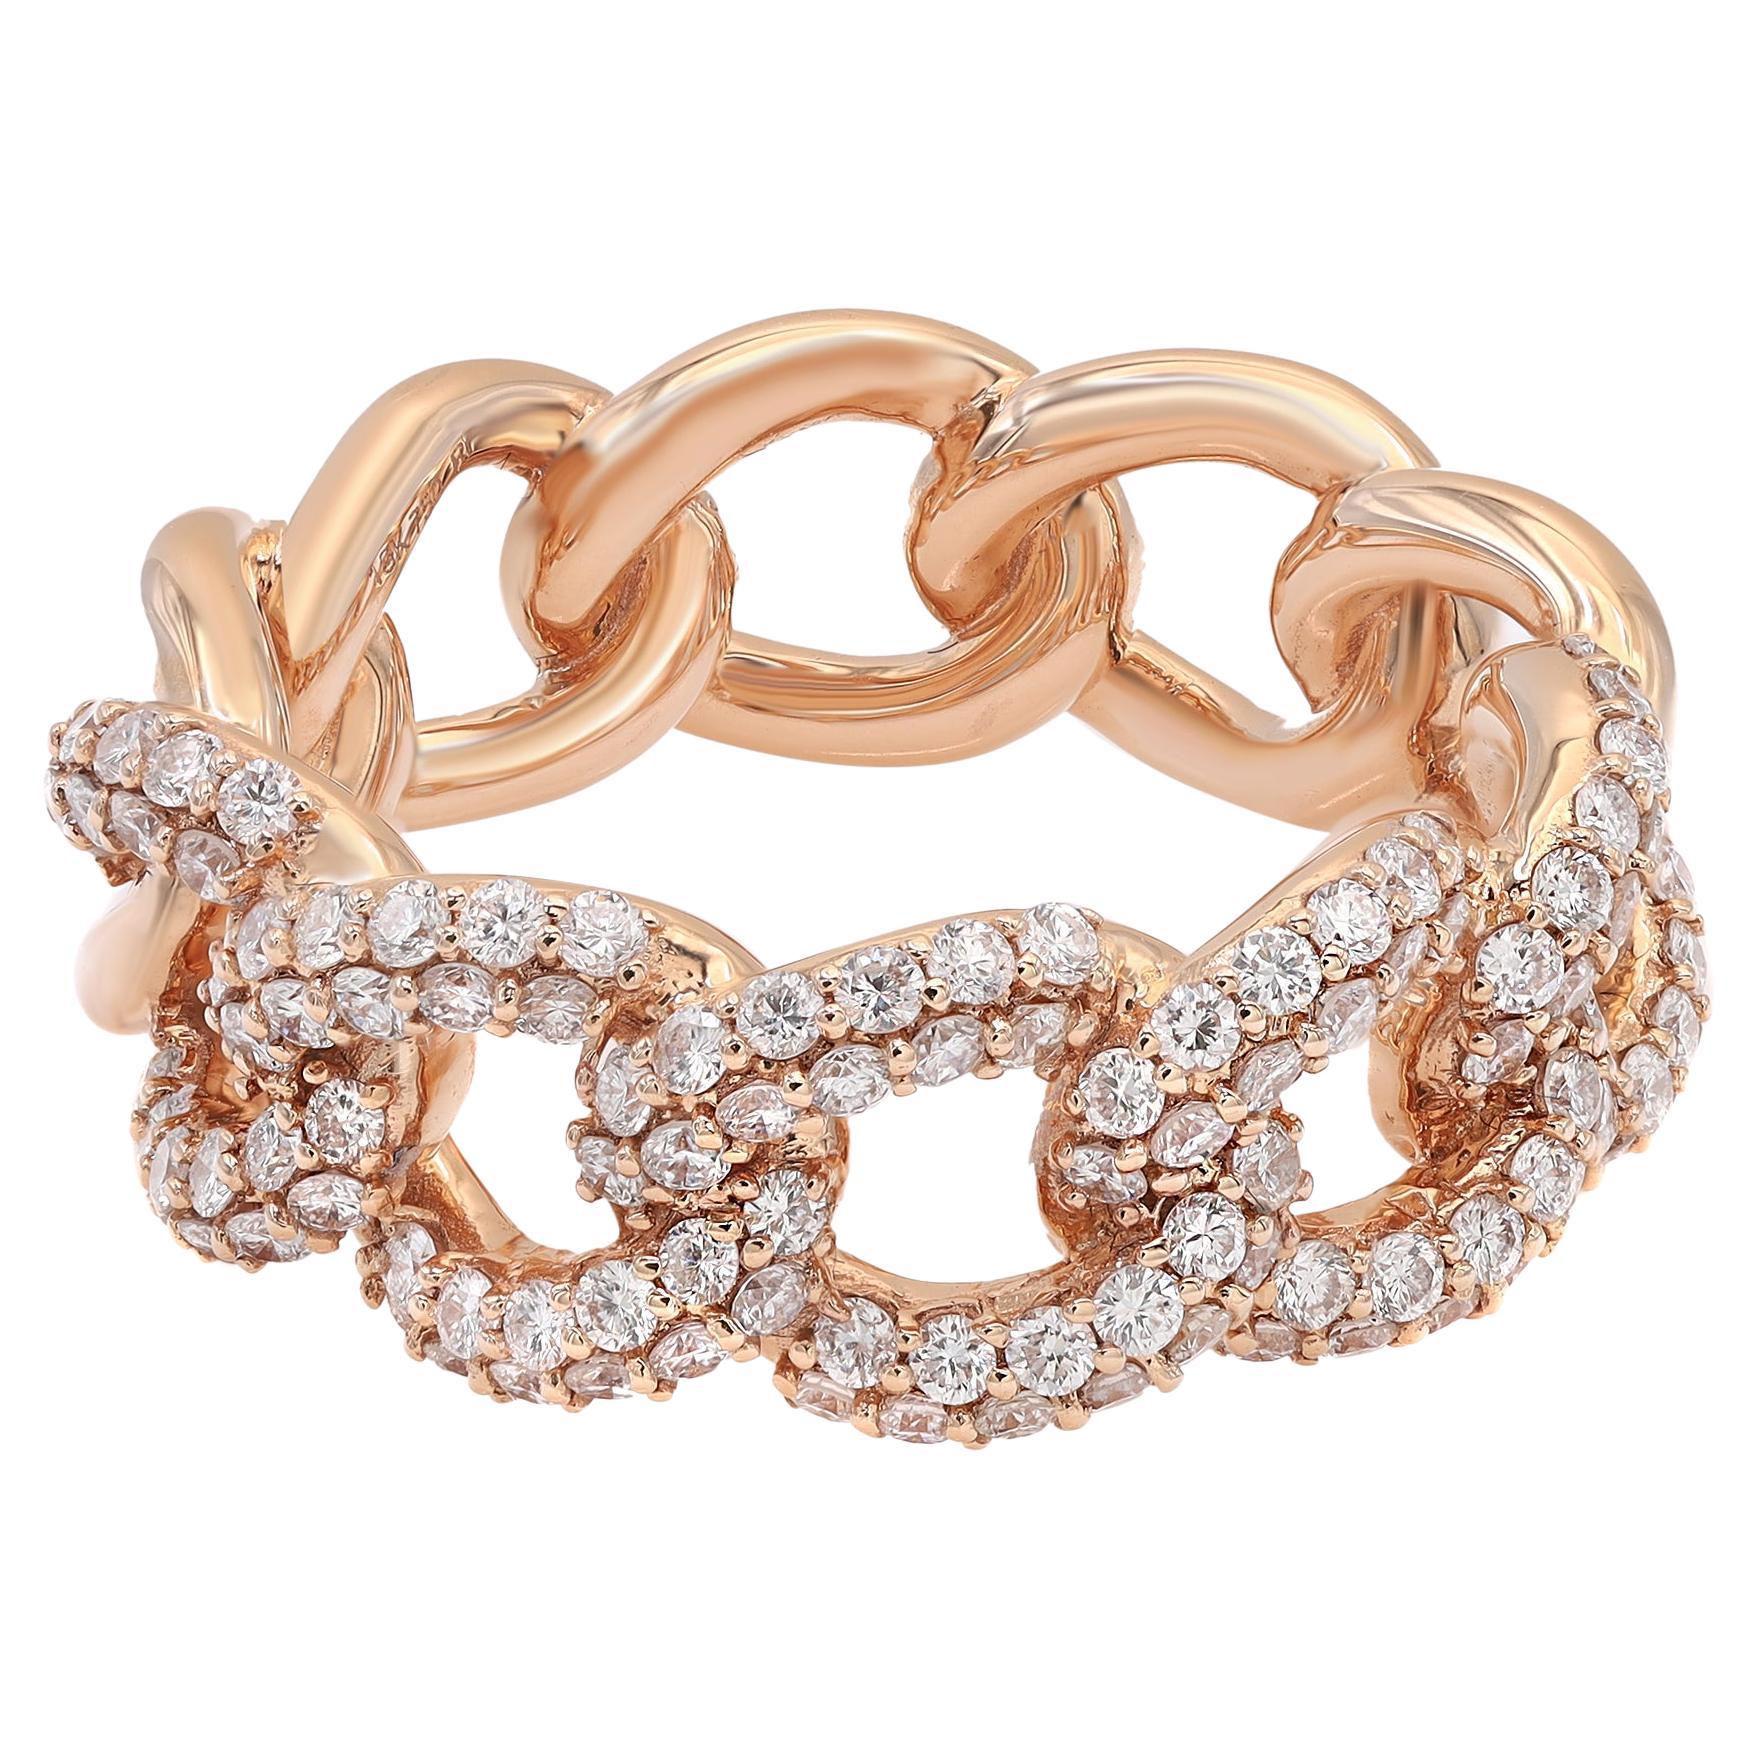 Pave Set Round Cut Diamond Chain Link Ring Band 18K Rose Gold 1.00Cttw Size 5.75 For Sale